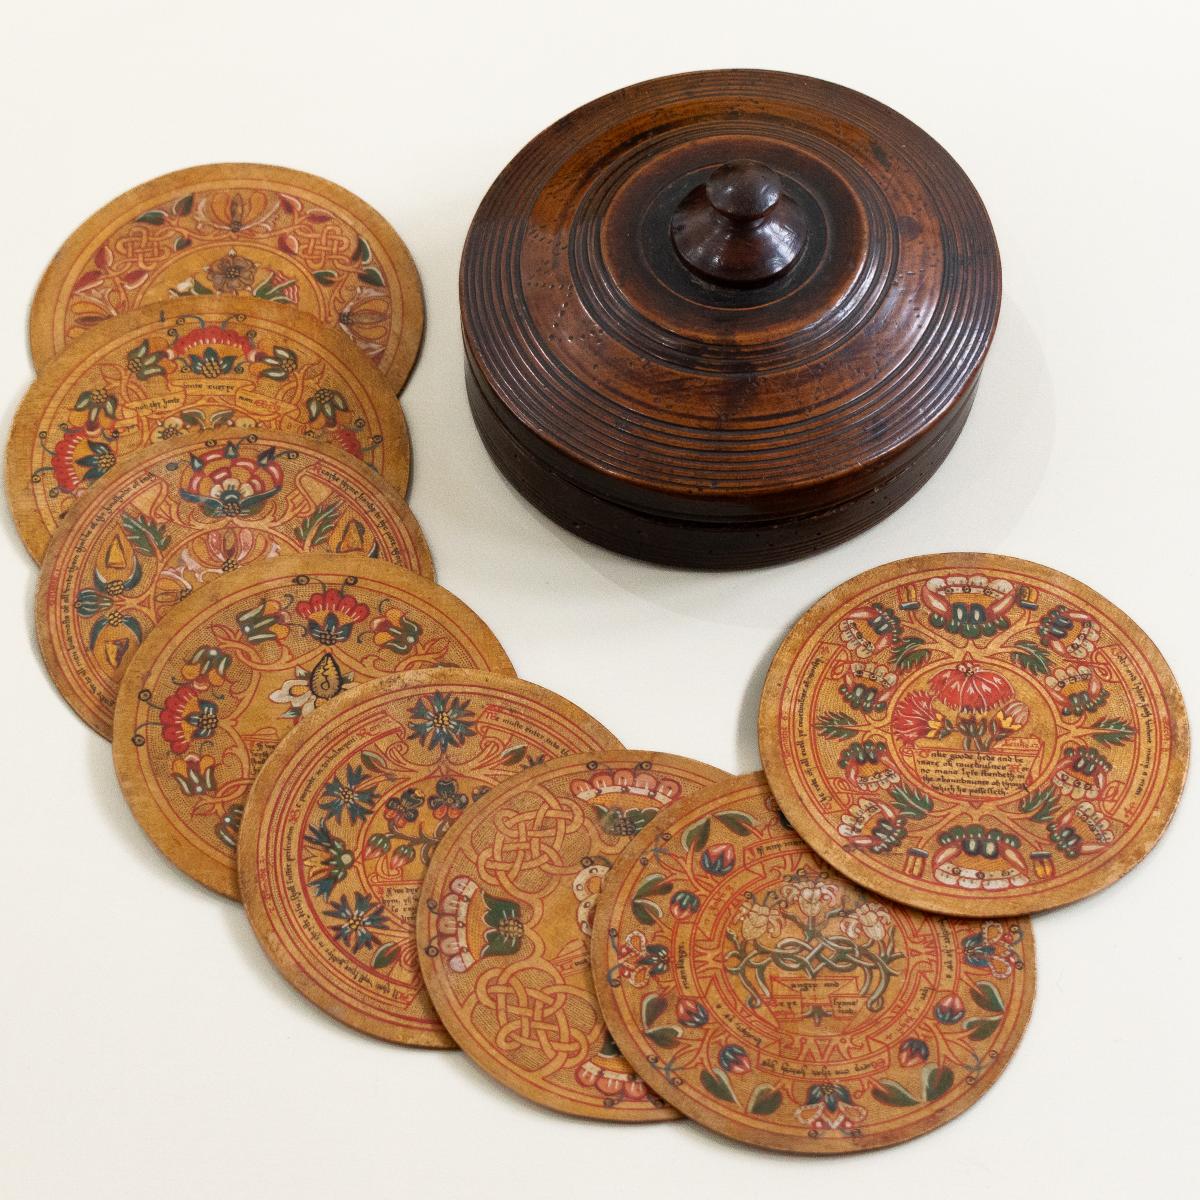 A rare and fine set of eight Elizabeth I beech/sycamore, polychrome-decorated and gilt roundels or trenchers, in original fruitwood box, circa 1580